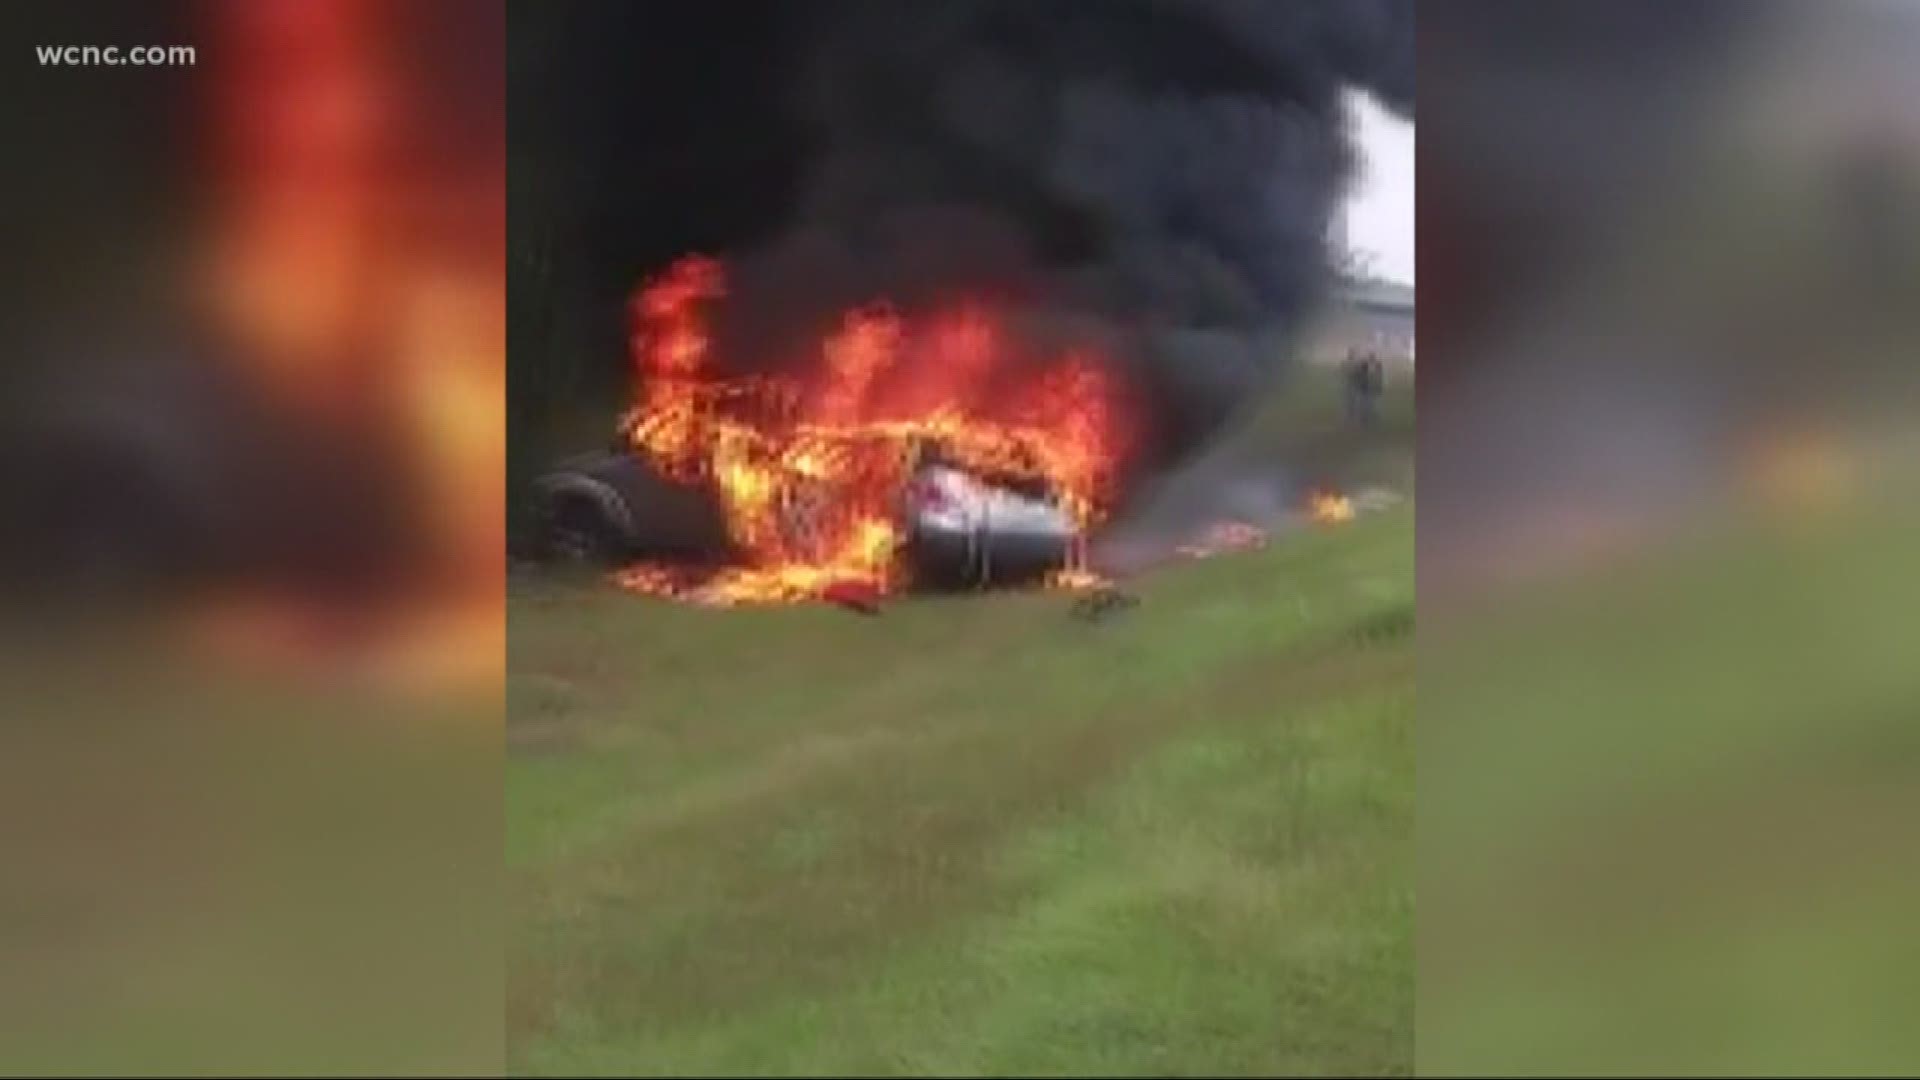 An FBI agent and two Good Samaritans stopped on the side of the road when they saw the vehicle on fire.